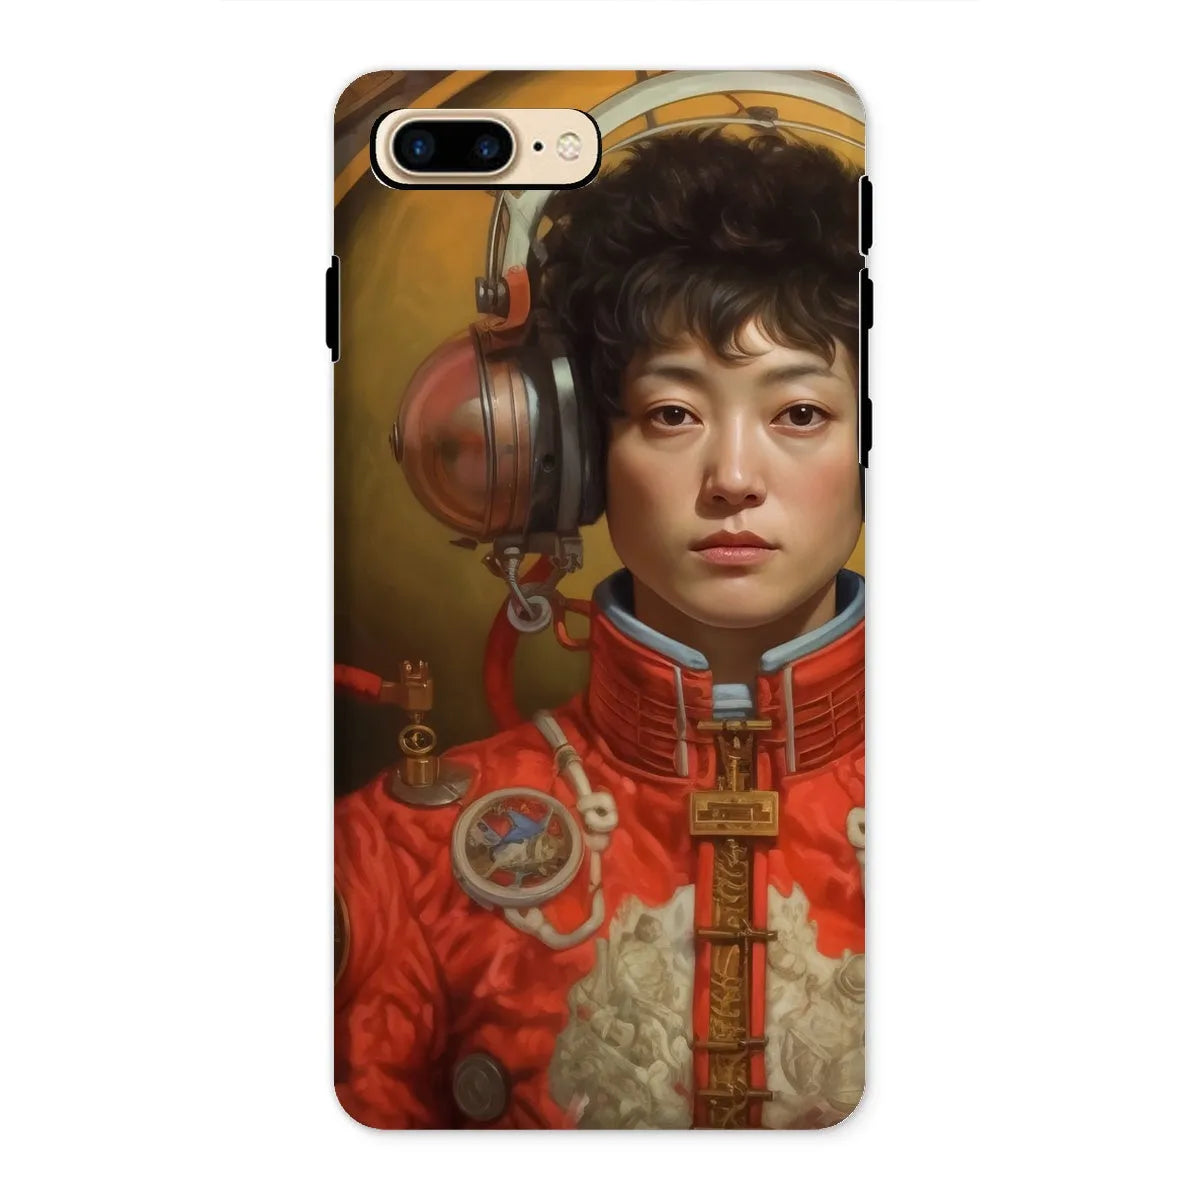 Mùchén - Gay Chinese Astronaut Aesthetic Phone Case - Iphone 8 Plus / Matte - Mobile Phone Cases - Aesthetic Art